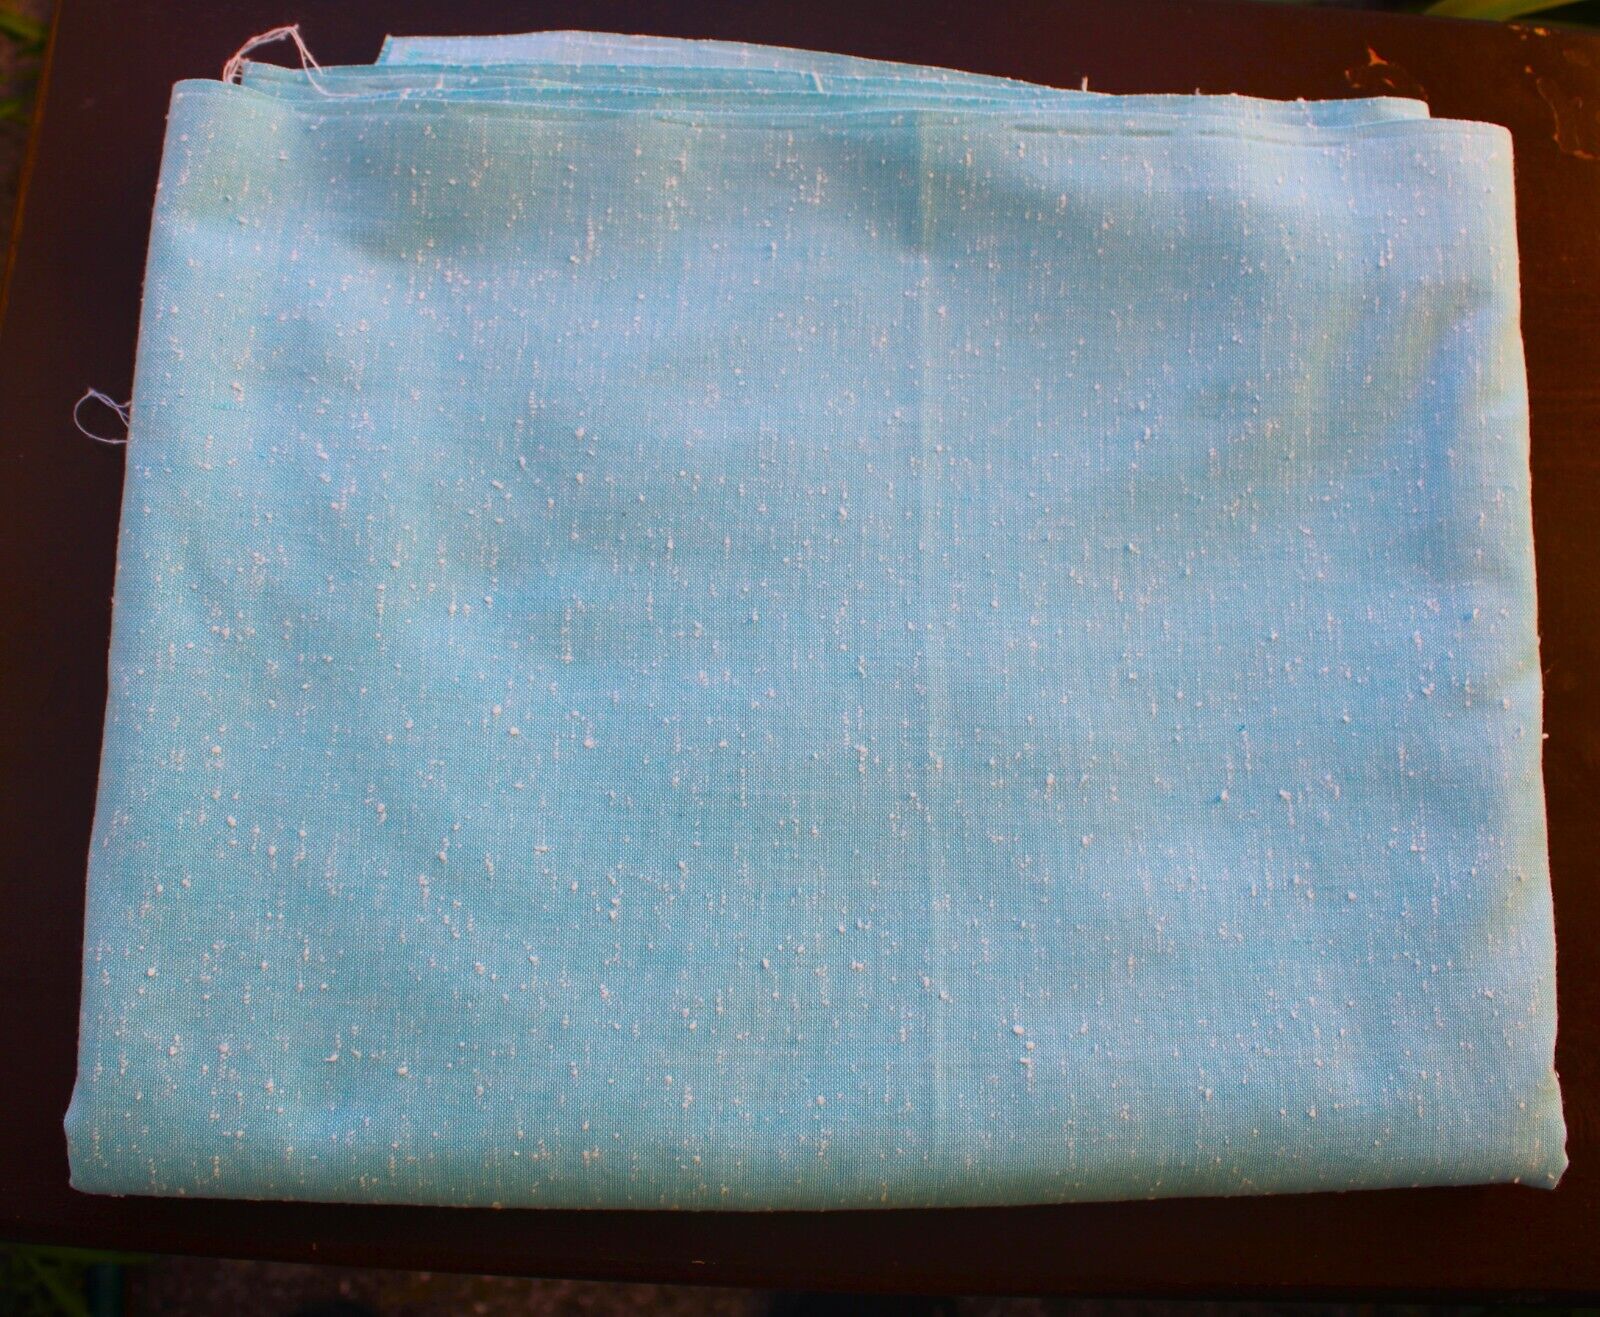 Vintage 1970s Turquoise Hoya Cloth Garment Sewing Fabric 2 3/4 yards x 44 inches